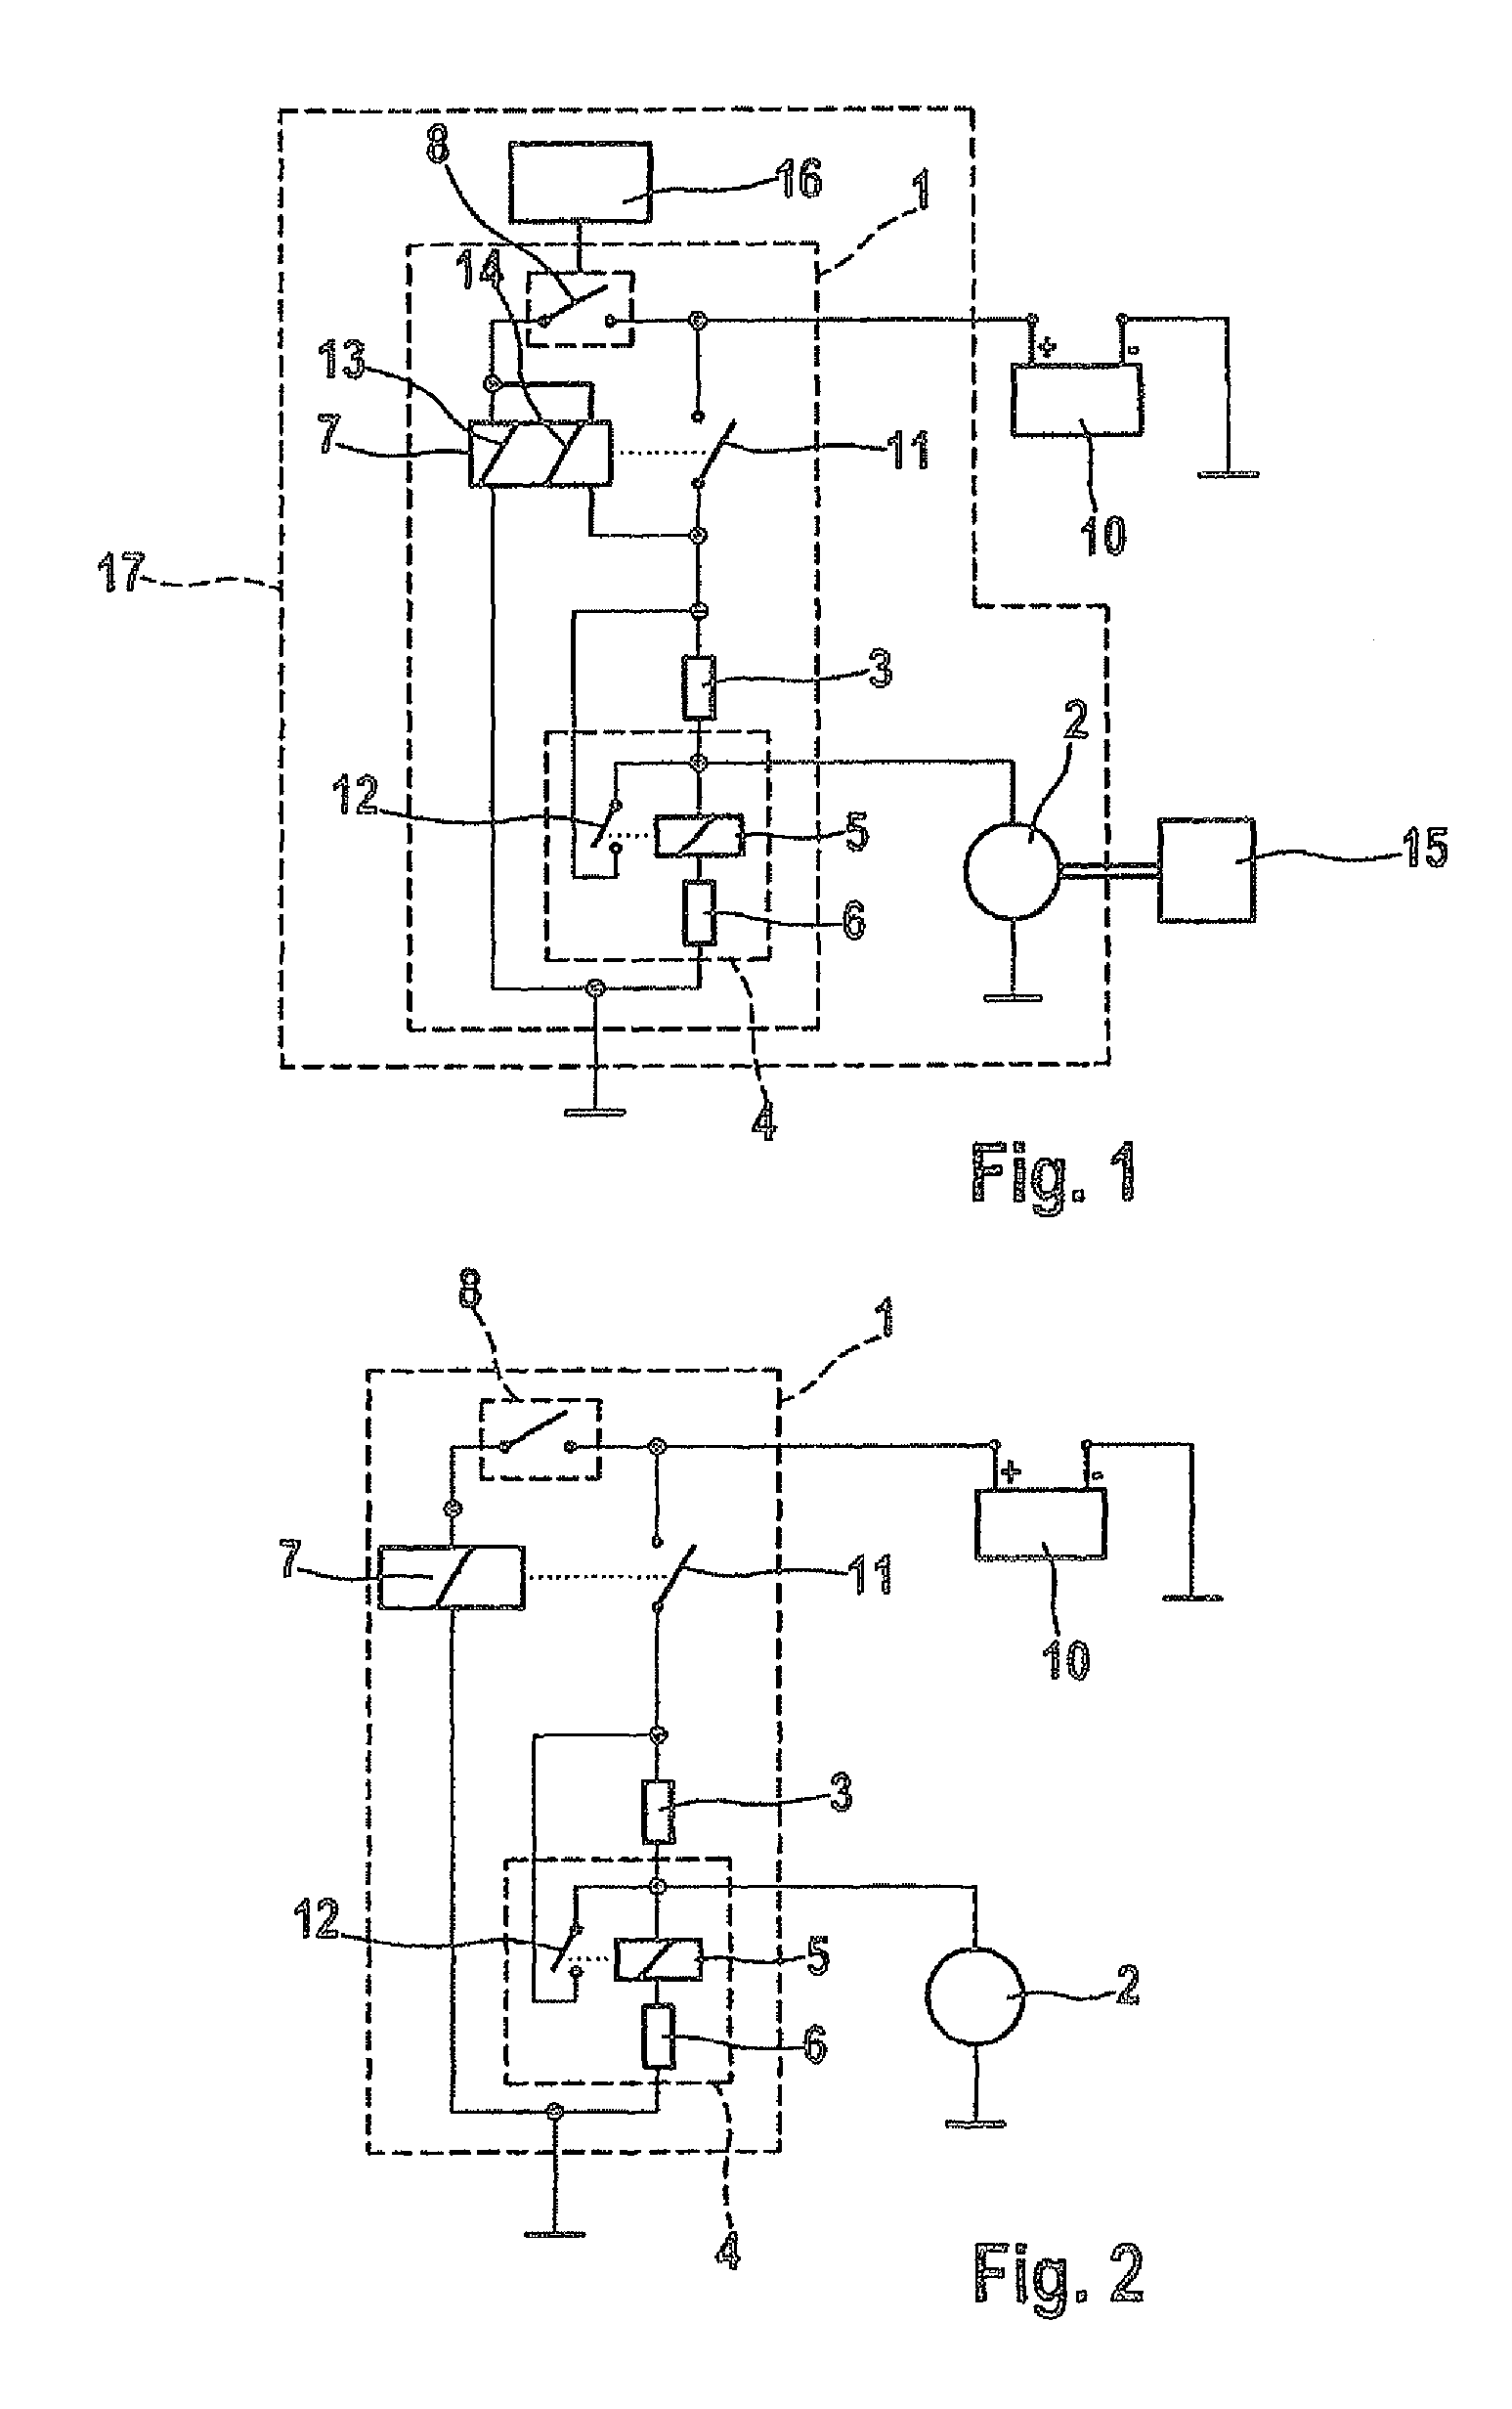 Circuit configuration for a starting device